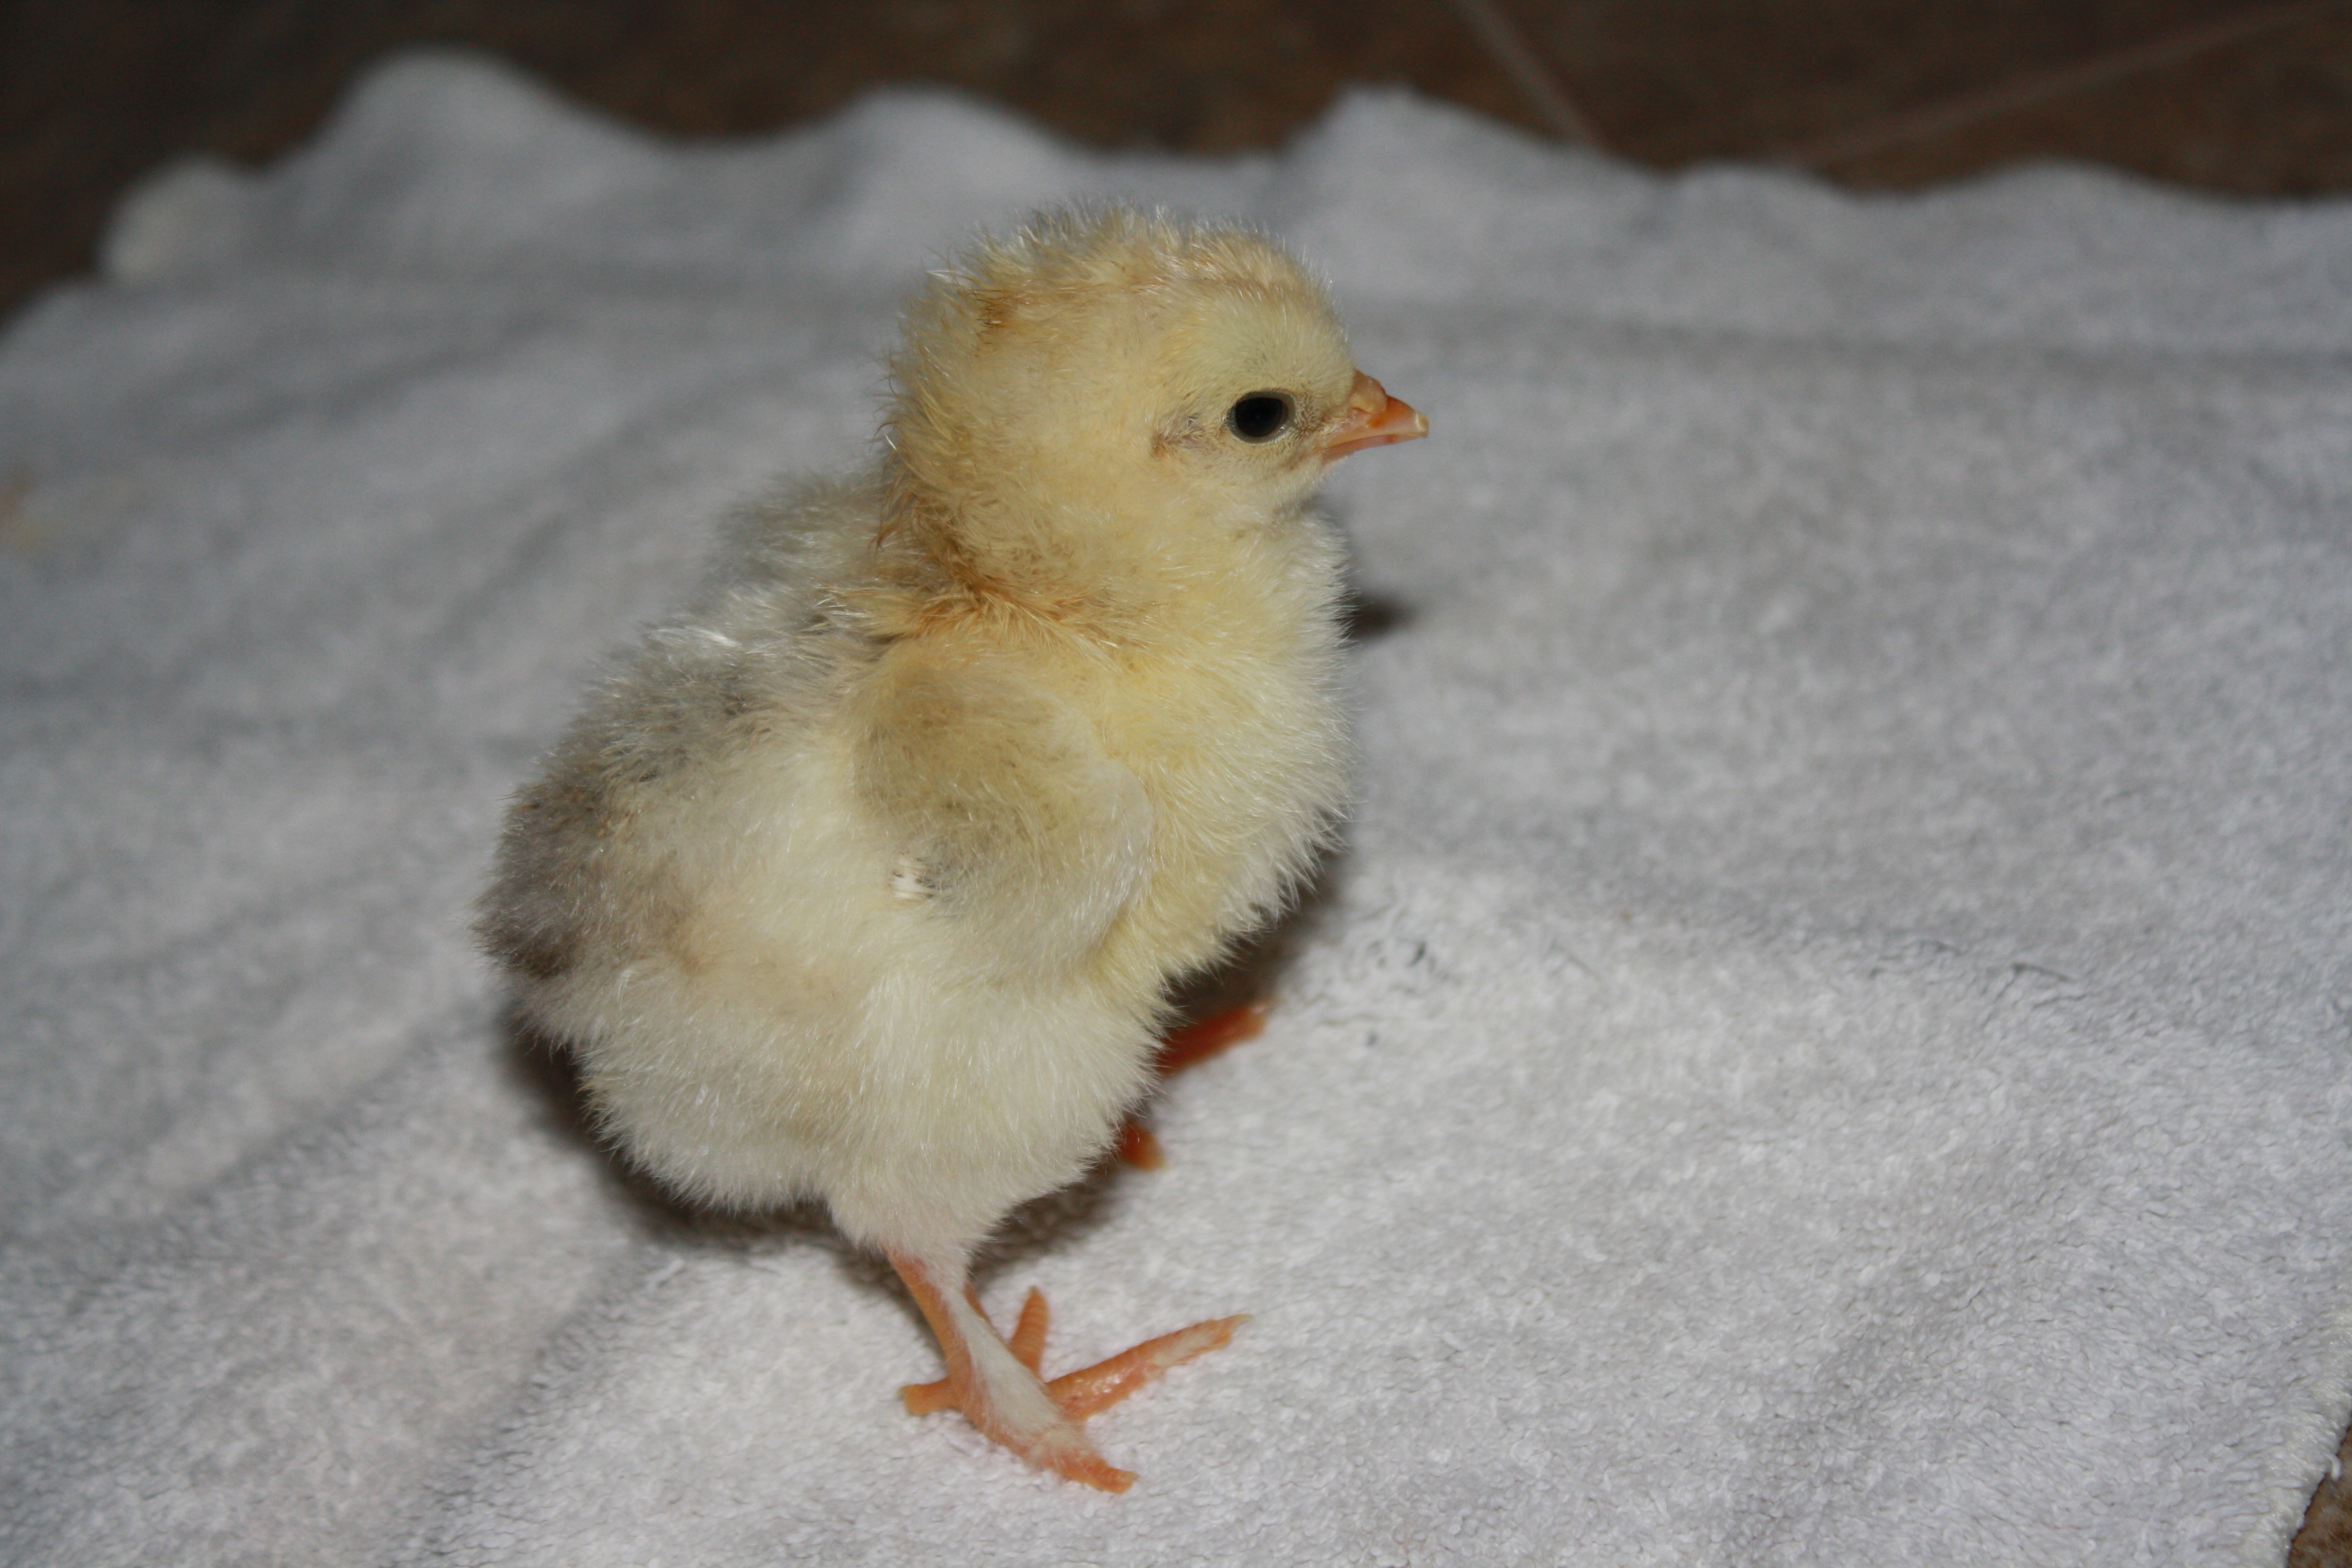 Little Miracle. The one and only to hatch from our 'everything happened wrong' homemade incubator science experiment.